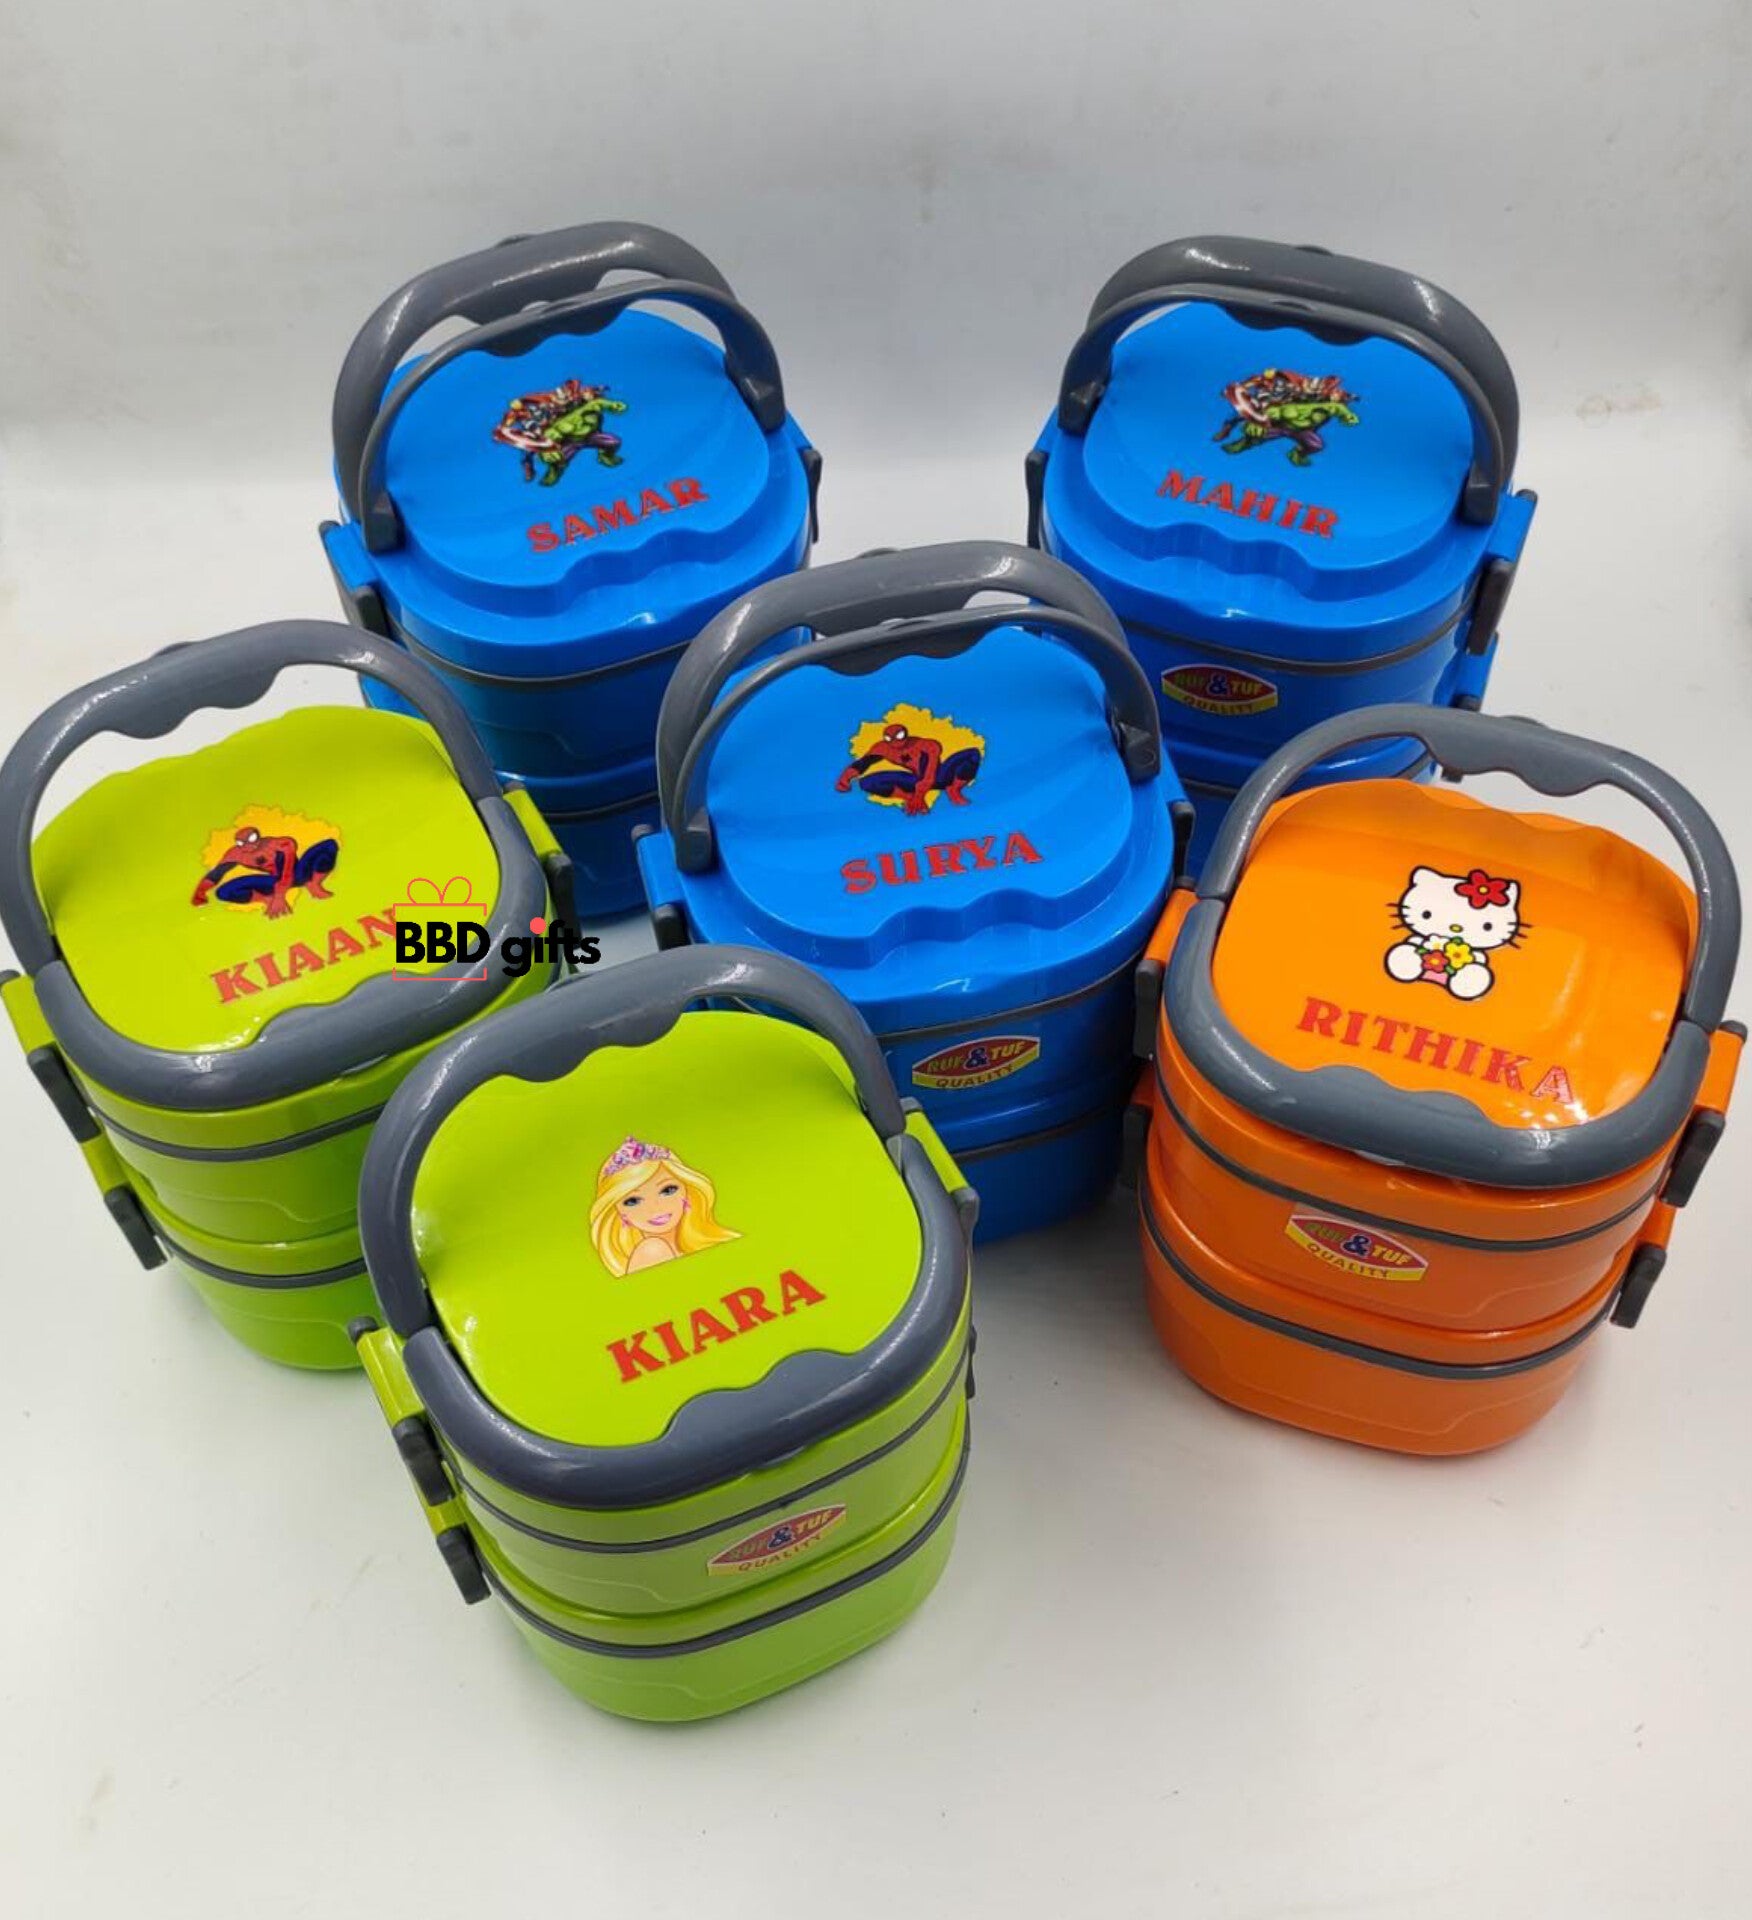 Customized lunch box for kids - Lunch Boxes For School - Best Gifts For Kids - Lunch Boxes For School Children - Custom Lunch Boxes For Kids